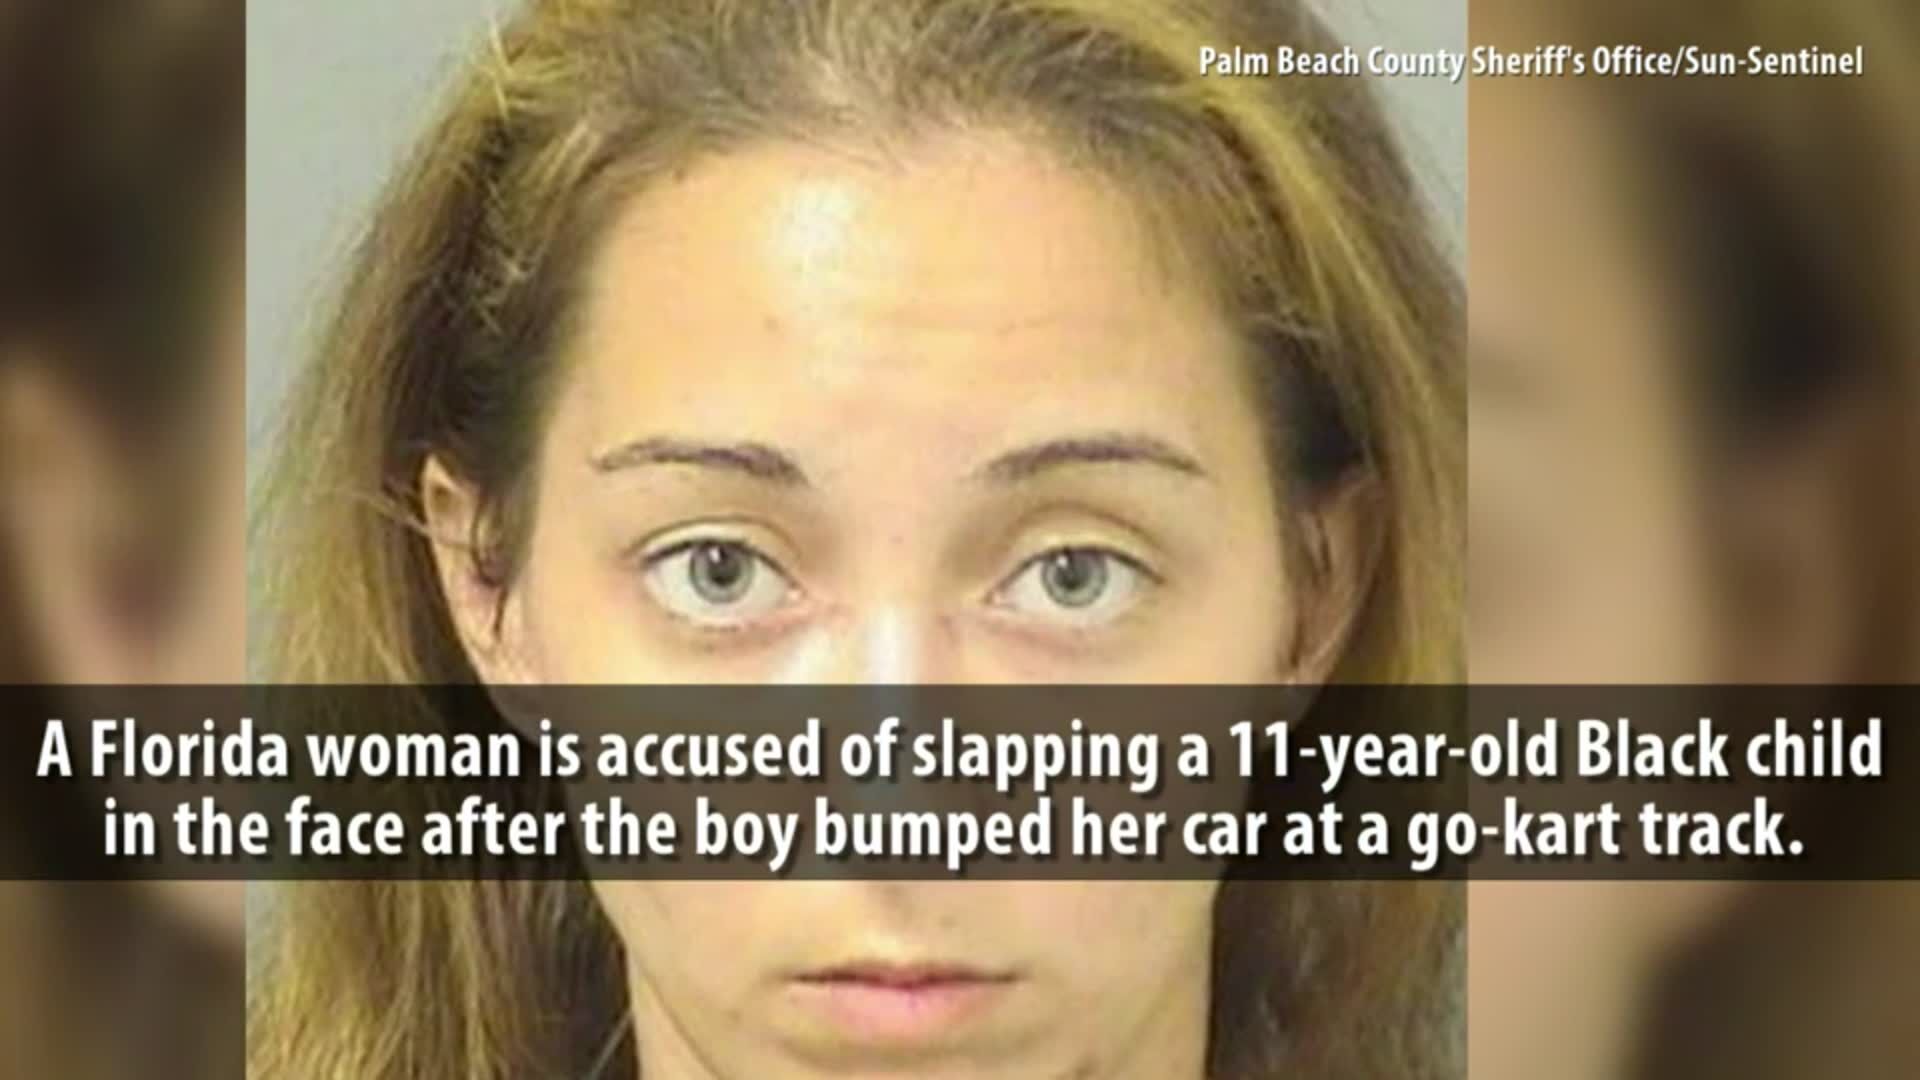 Police Florida woman slapped Black childs face, used racial slur at amusement center Trending fox23 pic picture